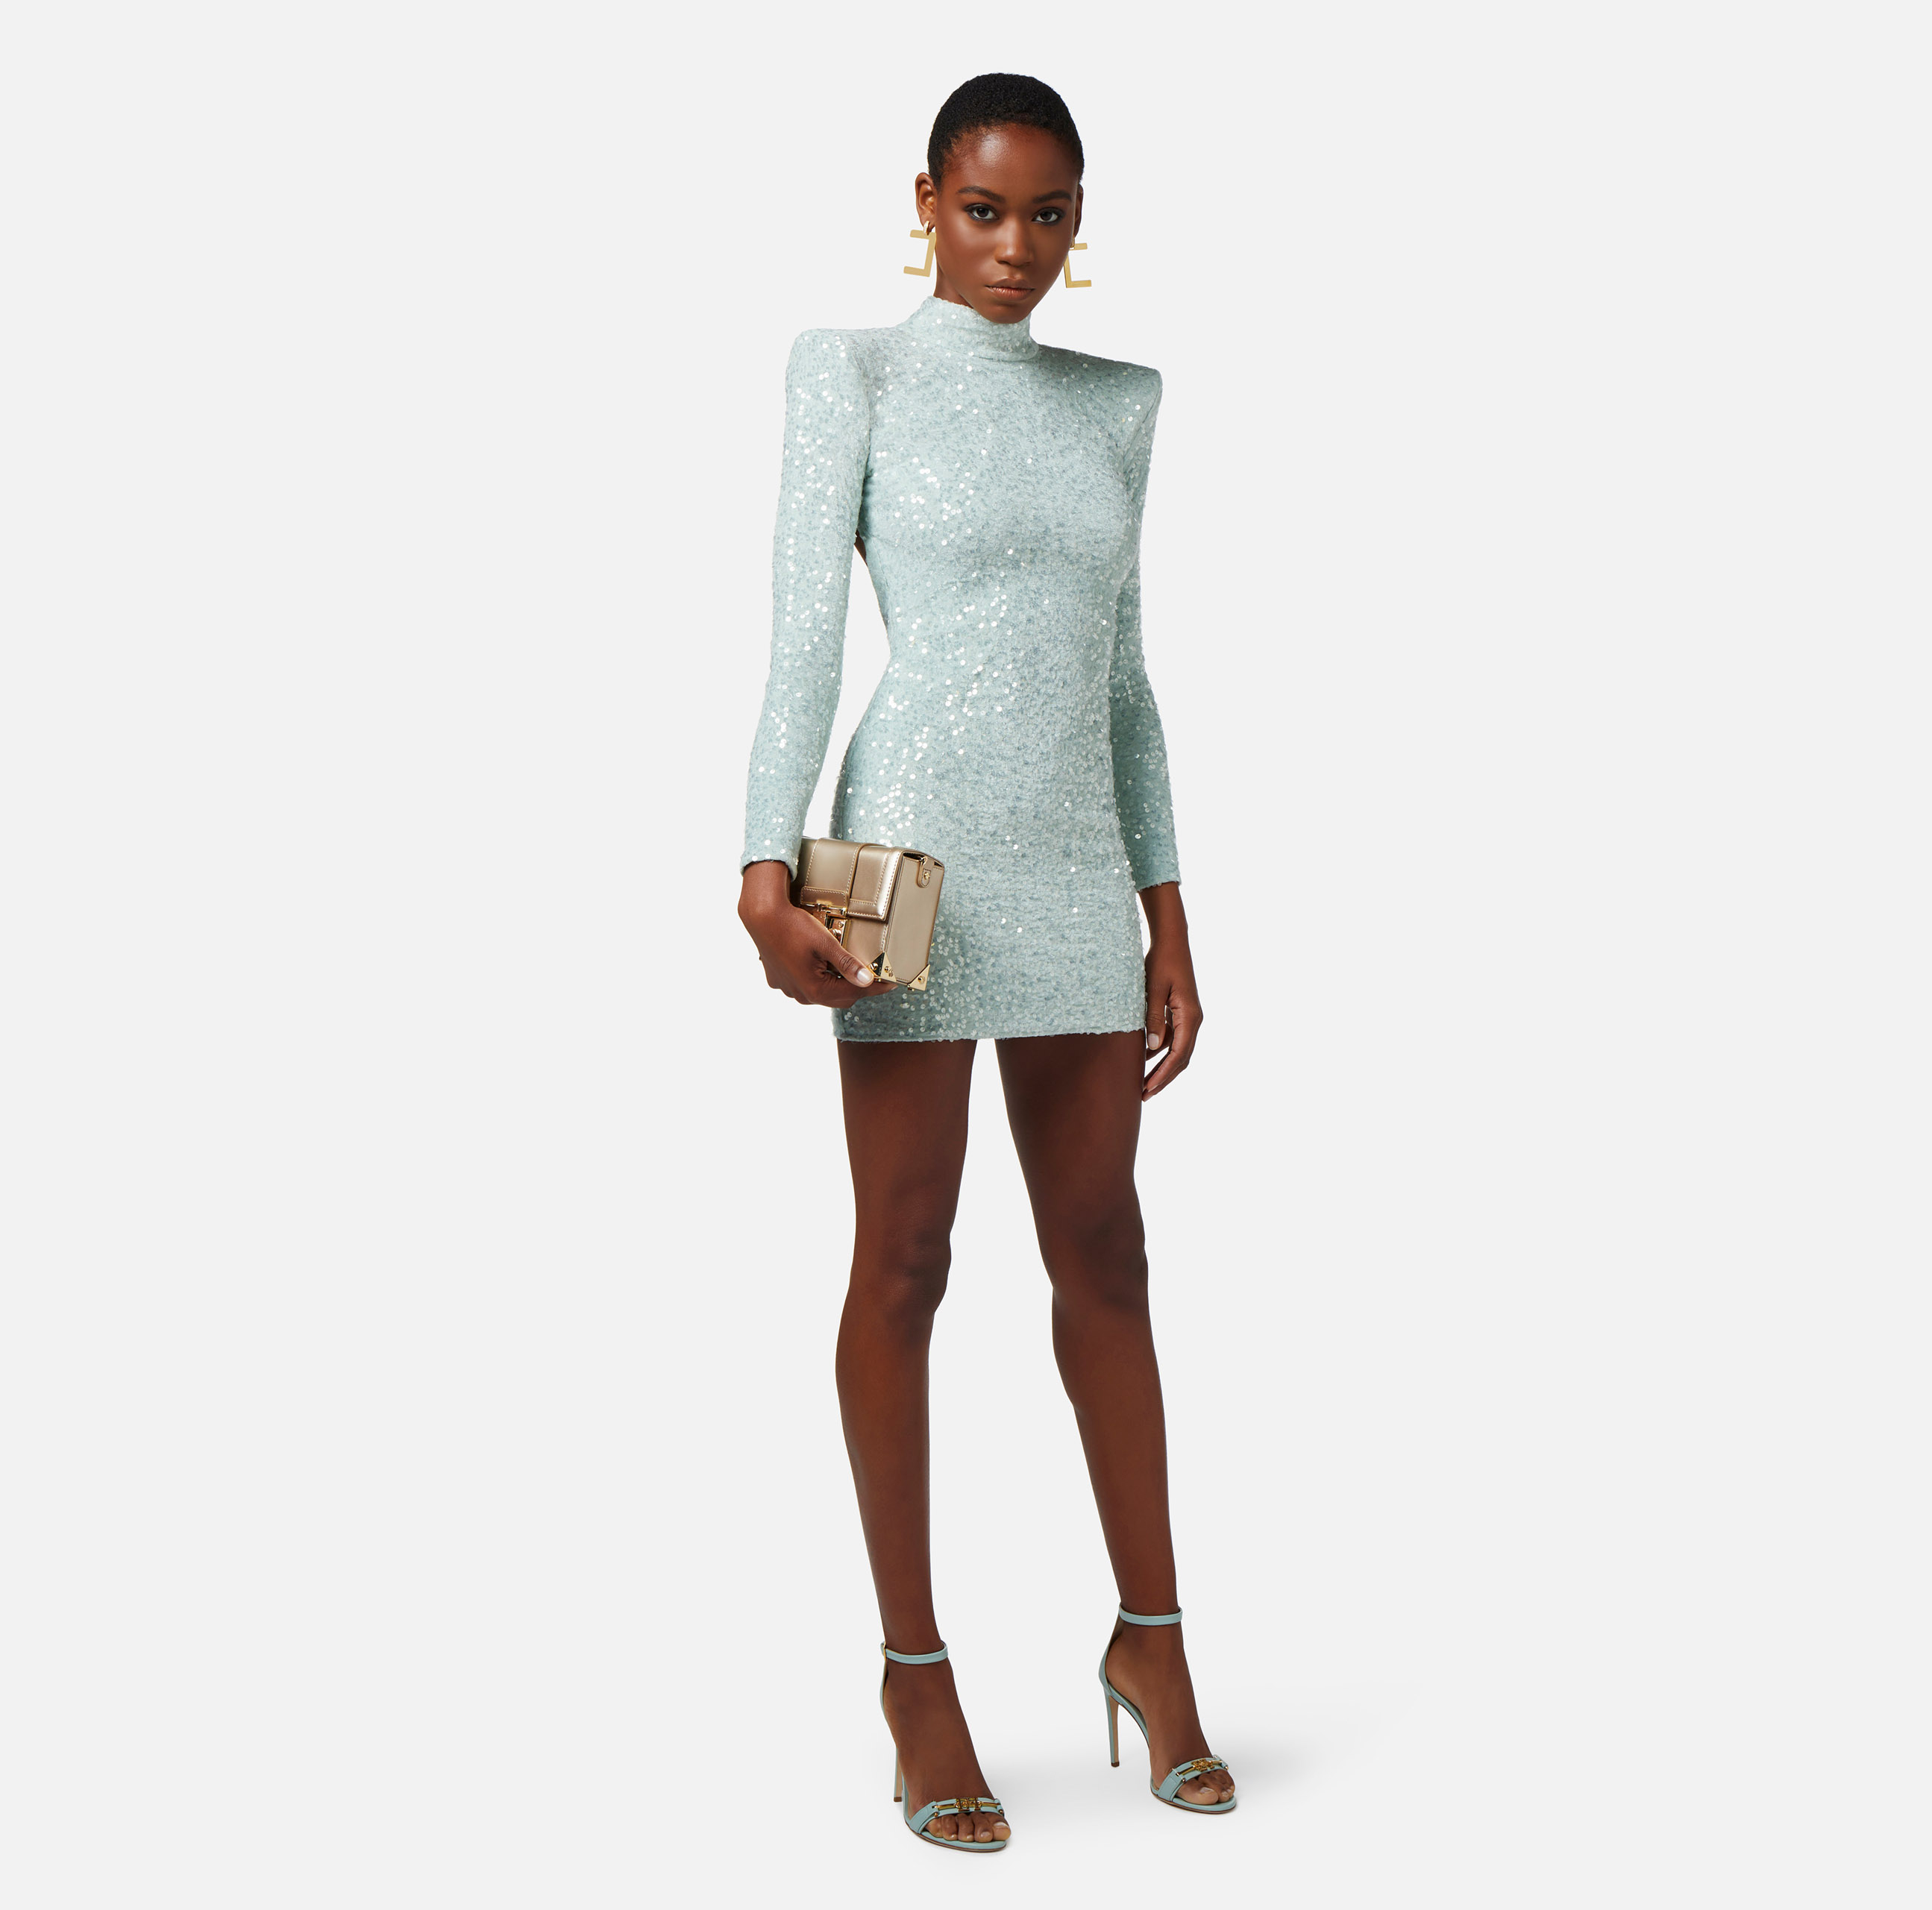 Mini-dress made of sequins with structured shoulders - Elisabetta Franchi